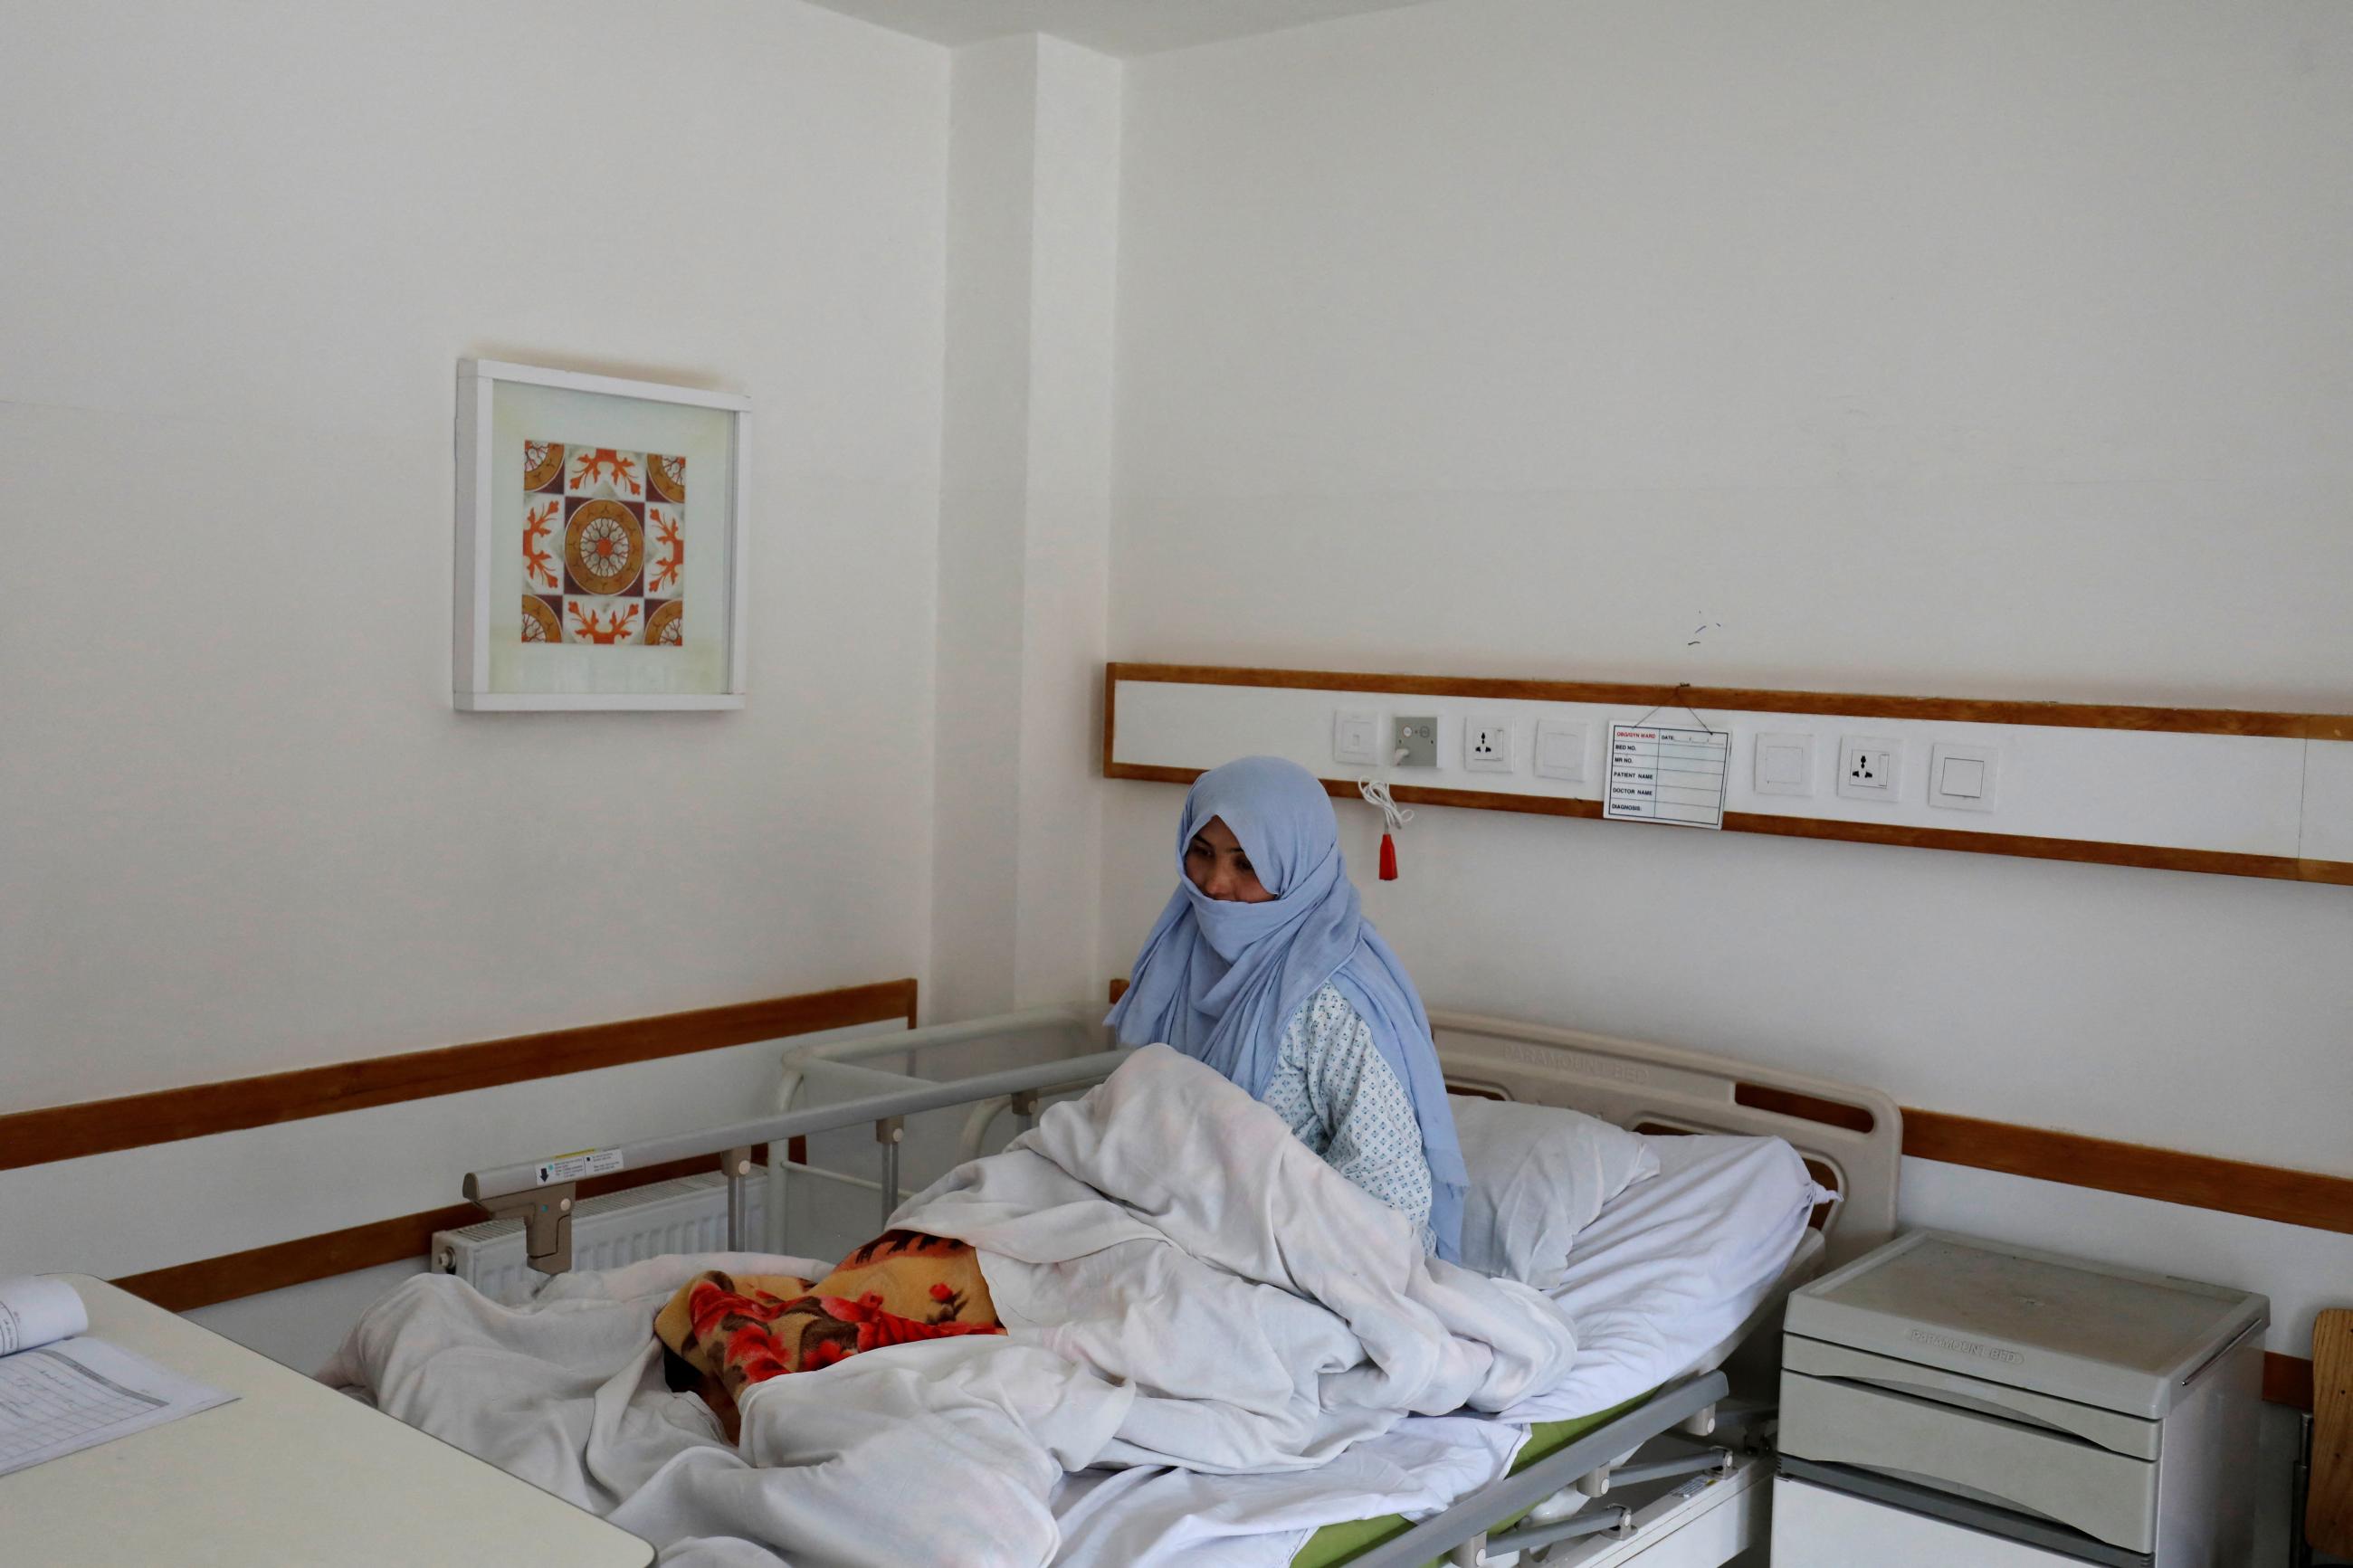 A woman sits on a hospital bed in Bamiyan, Afghanistan, March 02, 2023. Since taking over in 2021, Taliban authorities have barred women from universities and most charity jobs, but they have made exemptions in the healthcare sector